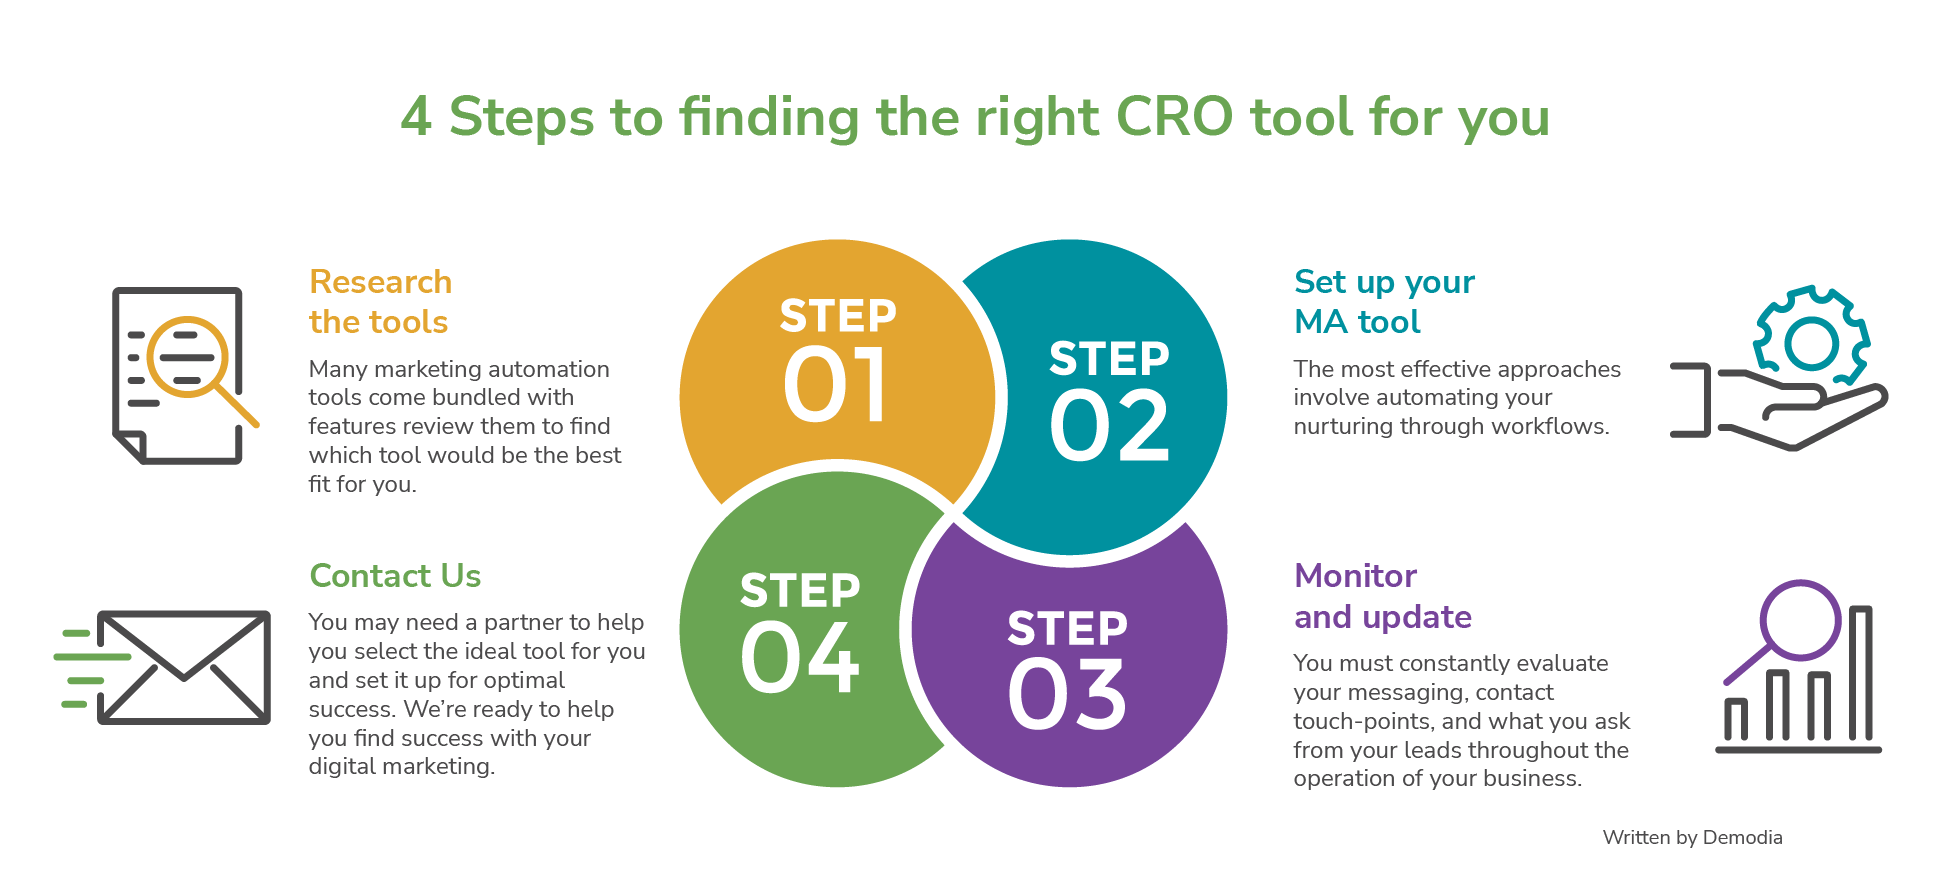 4-Steps-to-finding-the-right-CRO-tool-for-you